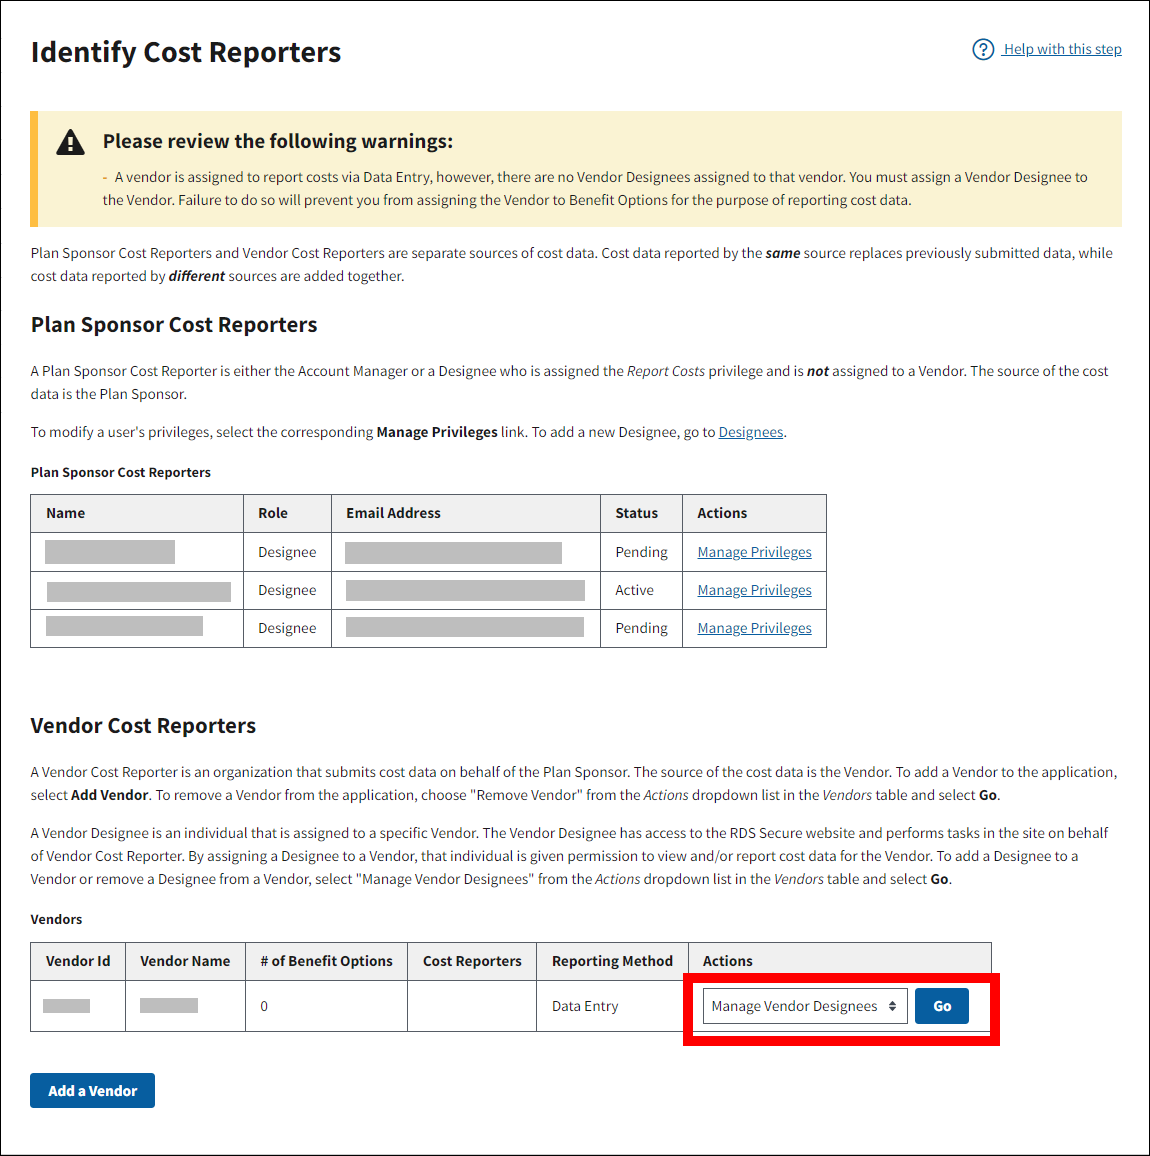 Identify Cost Reporters page with sample data. Actions is highlighted in Vendors table.